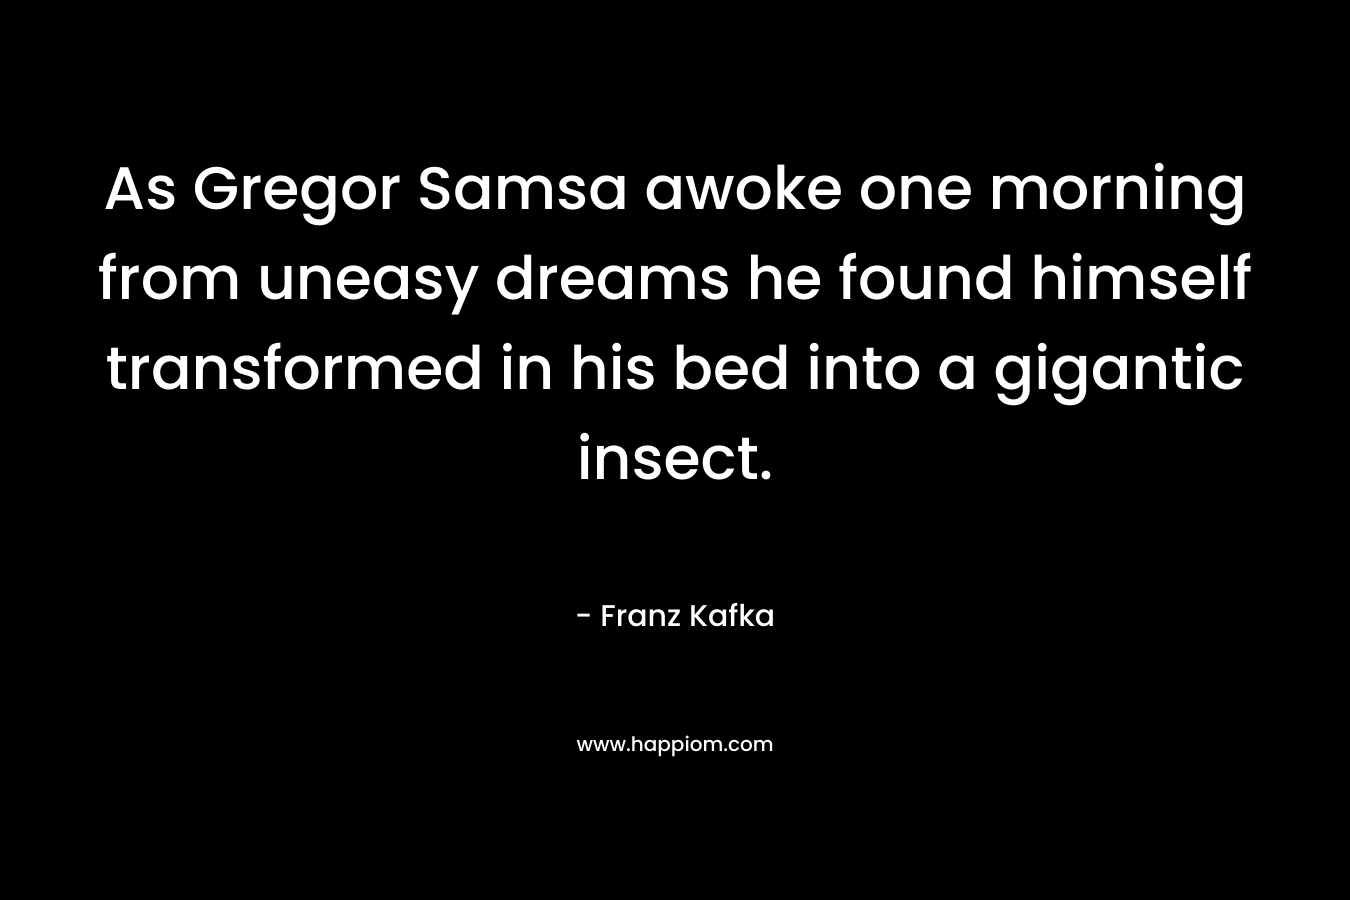 As Gregor Samsa awoke one morning from uneasy dreams he found himself transformed in his bed into a gigantic insect. – Franz Kafka